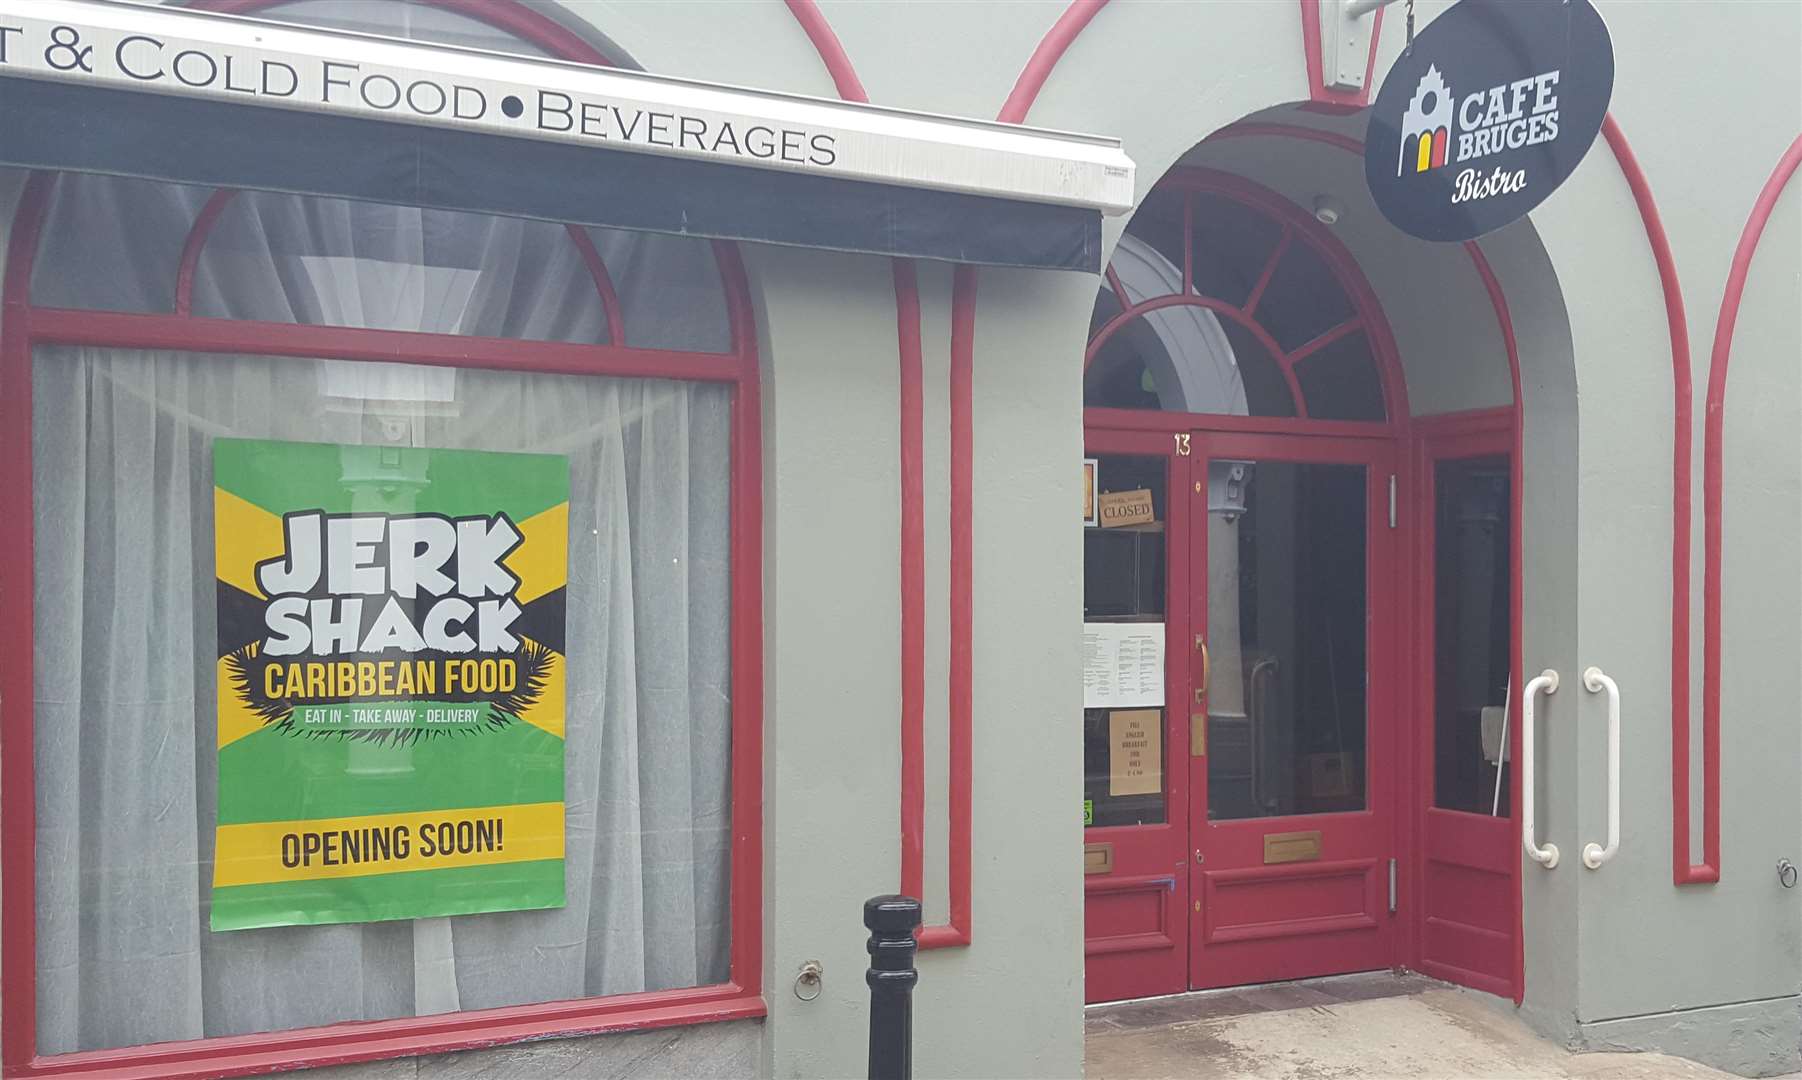 Cafe Bruges has closed to be replaced by Jerk Shack